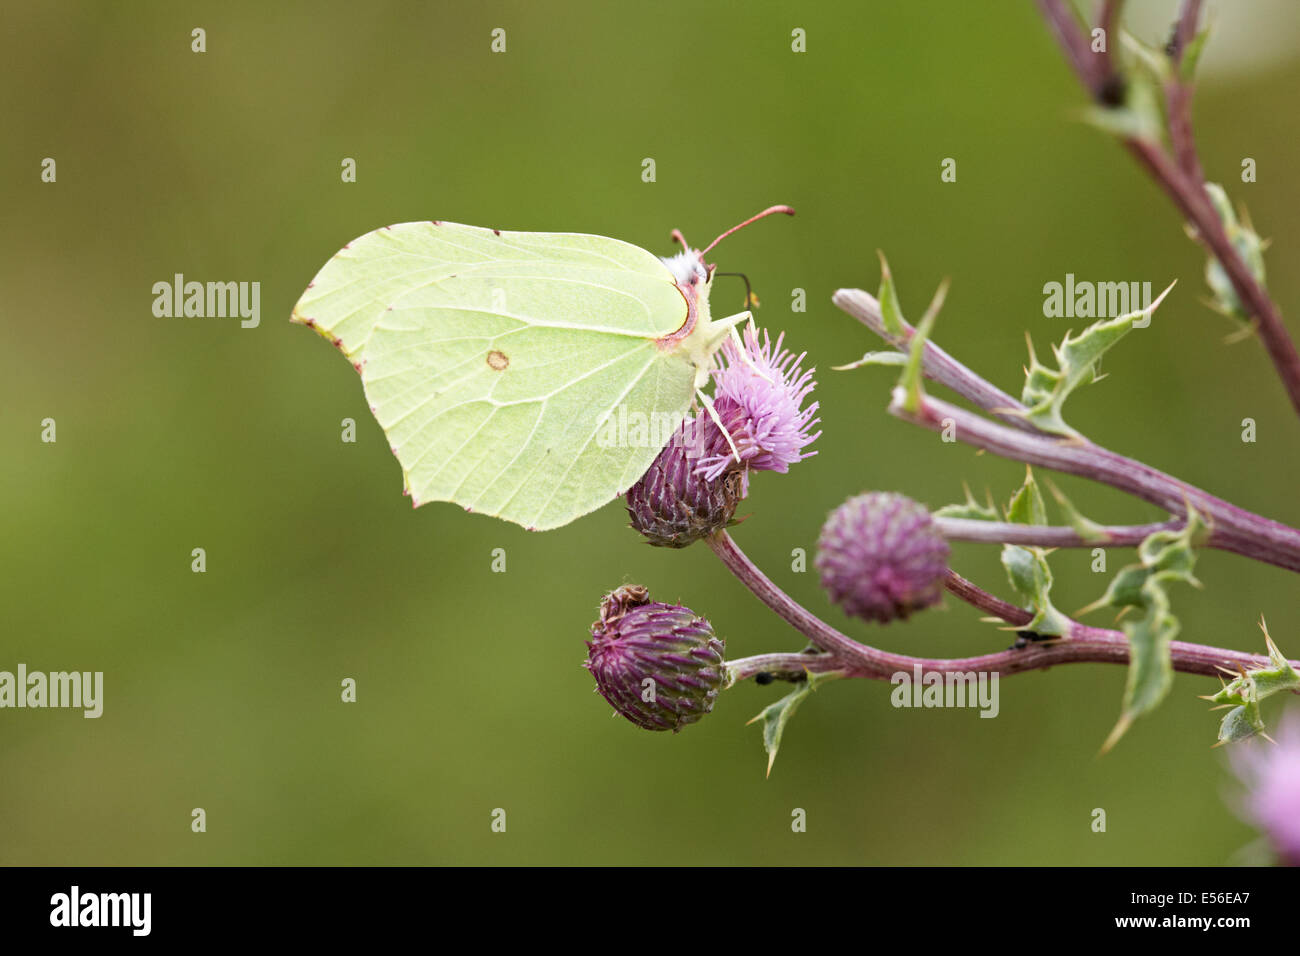 Brimstone butterfly, Gonepteryx rhamni, on thistle flowers at les monts d'eraines near Falaise, Normandy, France in July Stock Photo